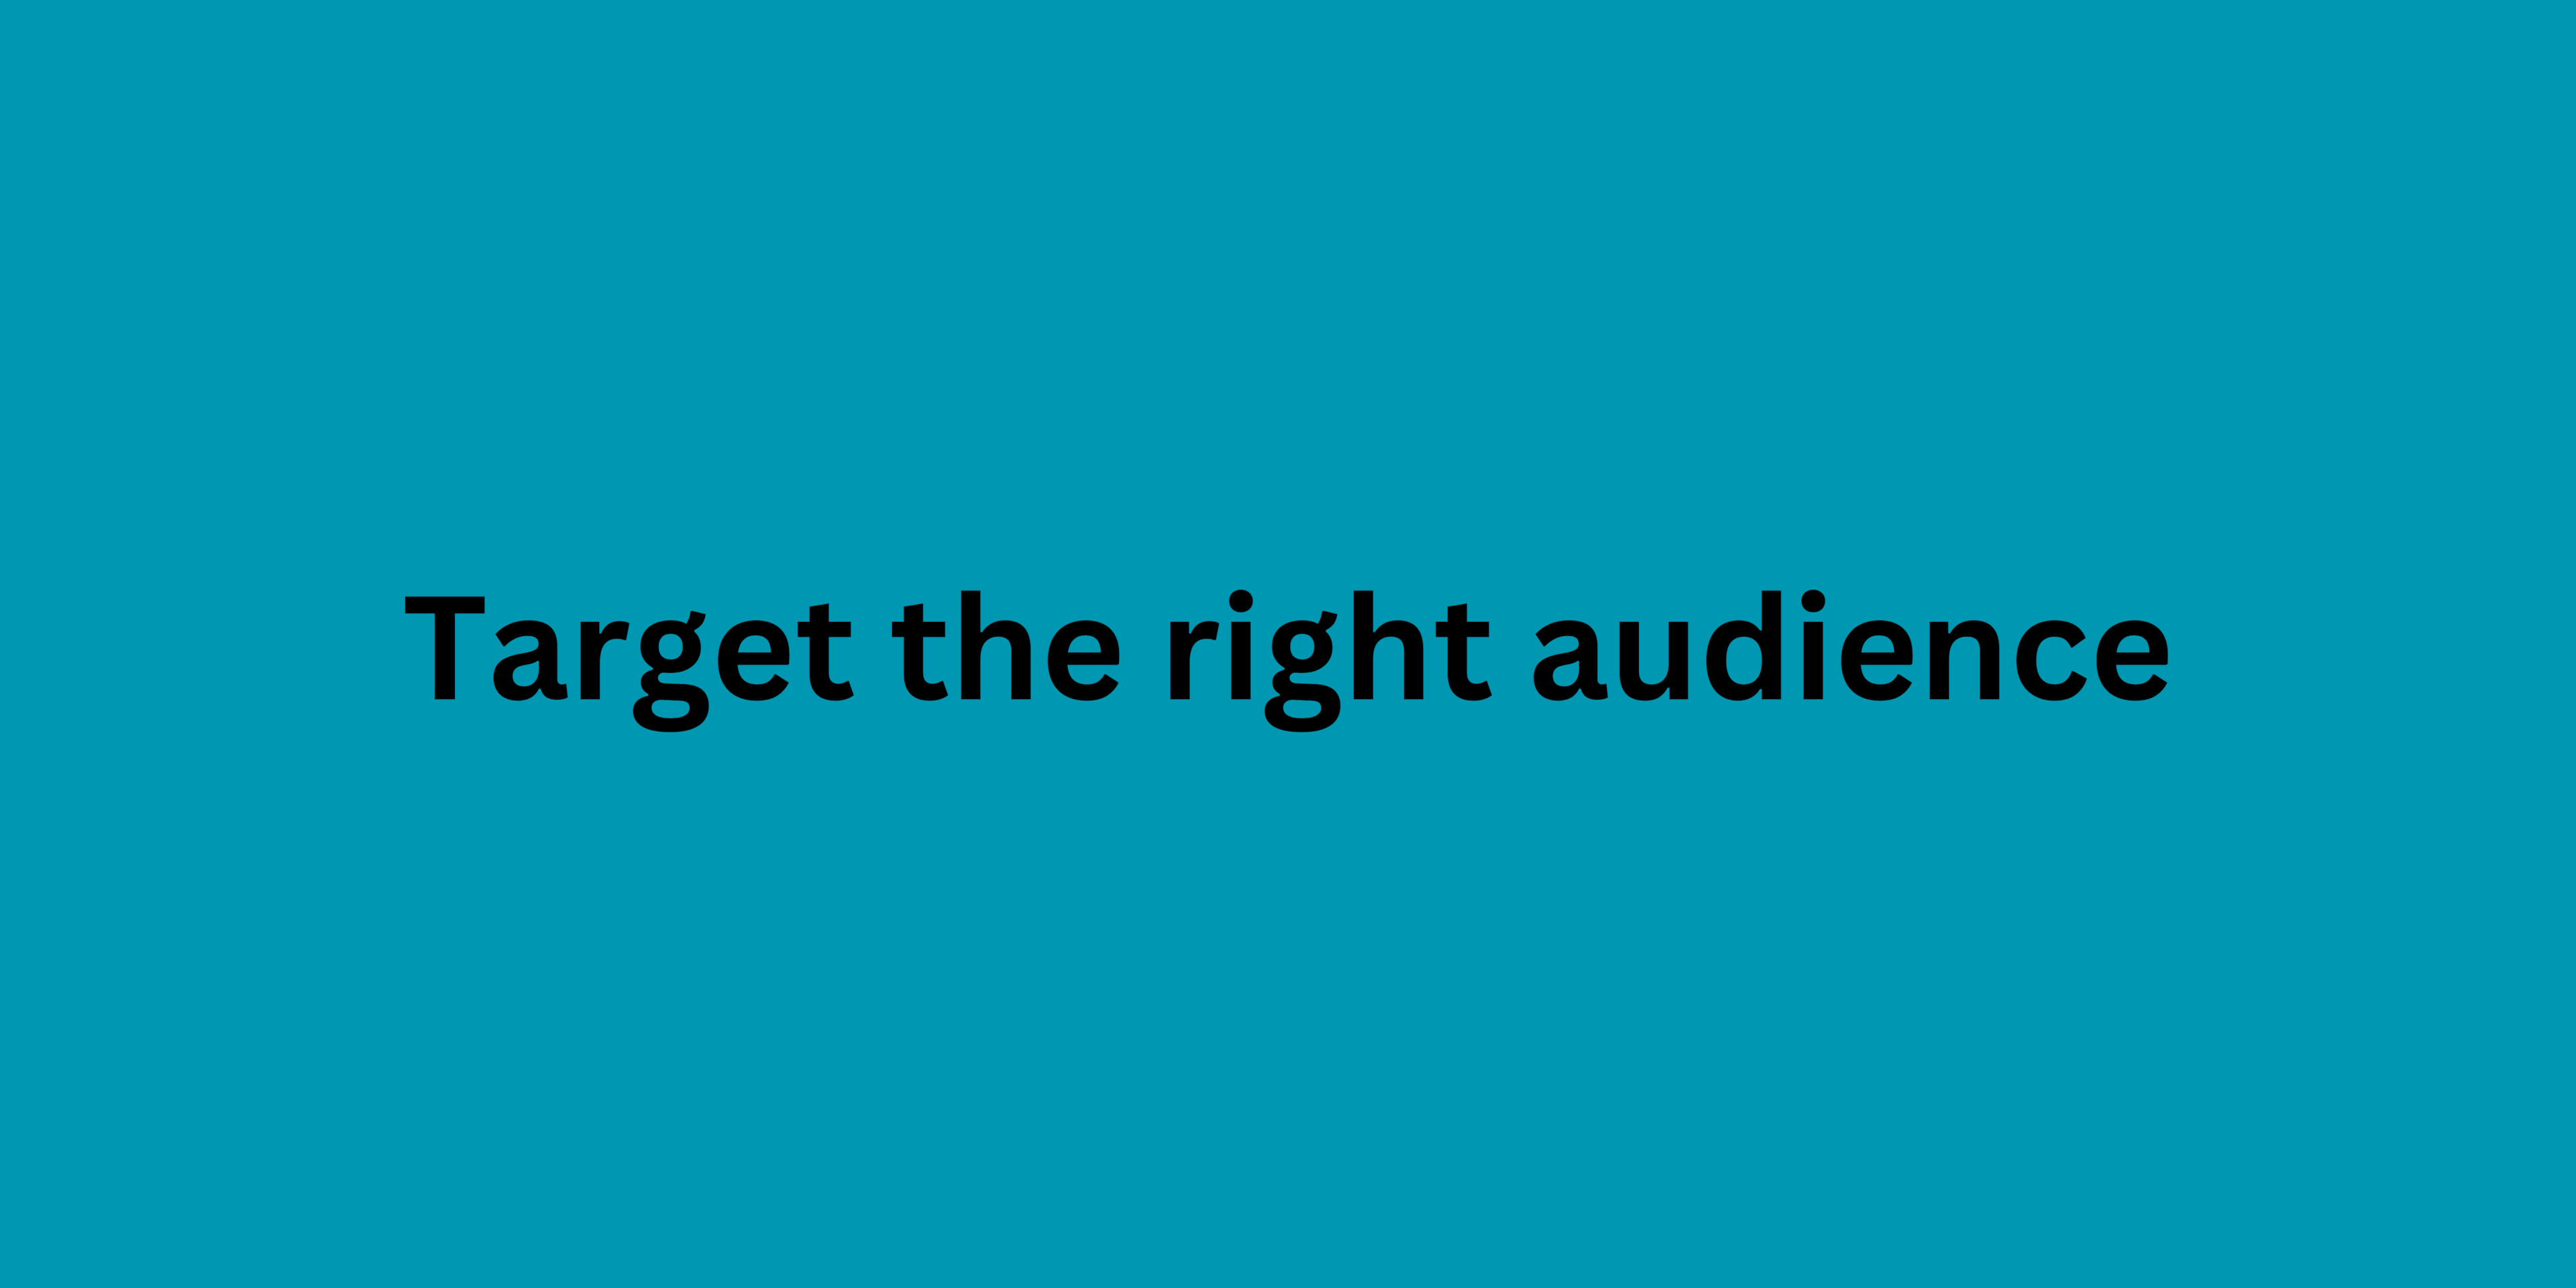 Target the right audience